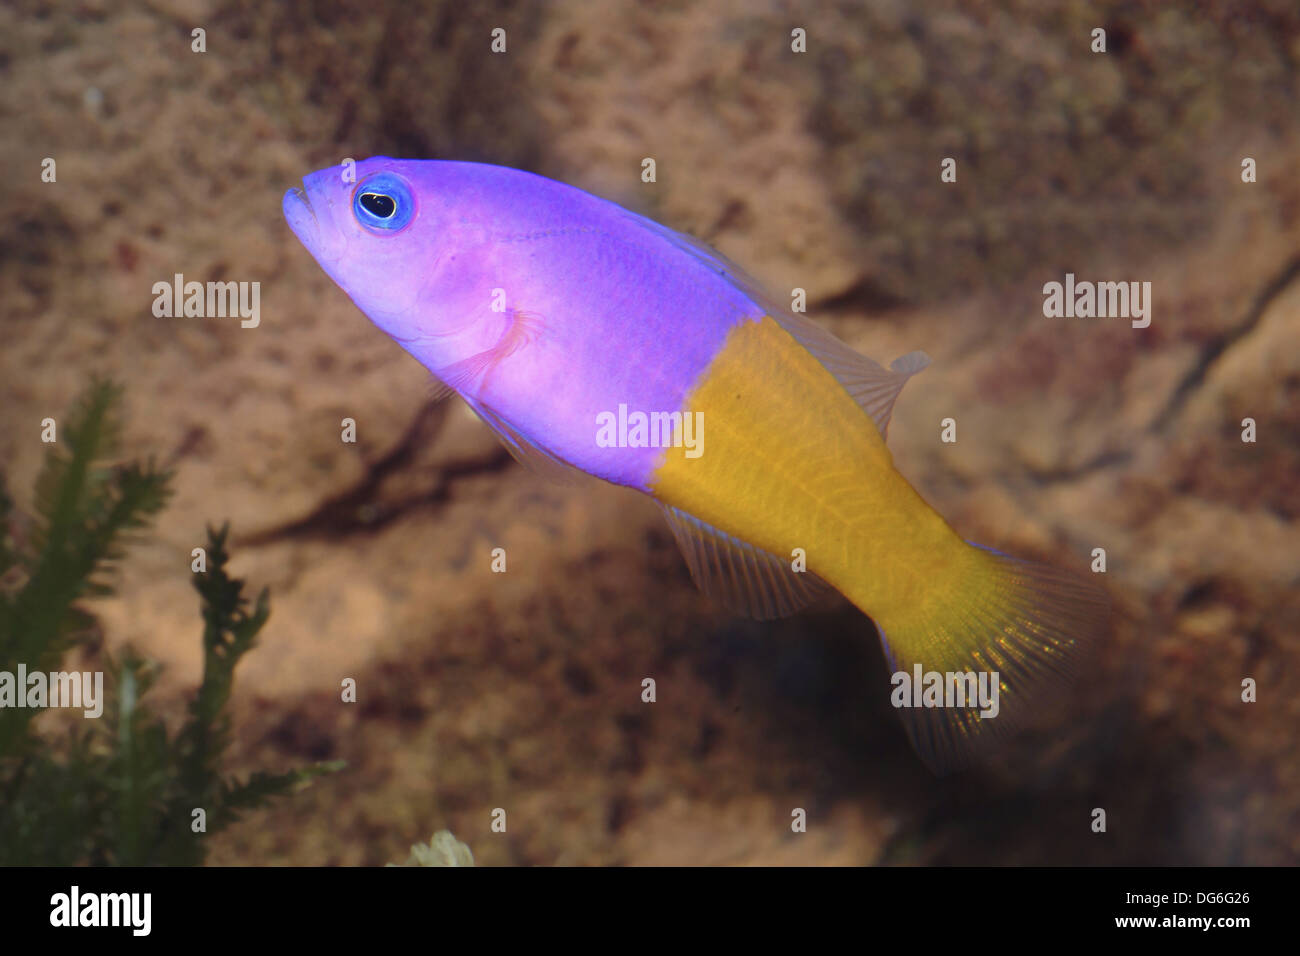 royal dottyback, pictichromis paccagnellae Stock Photo